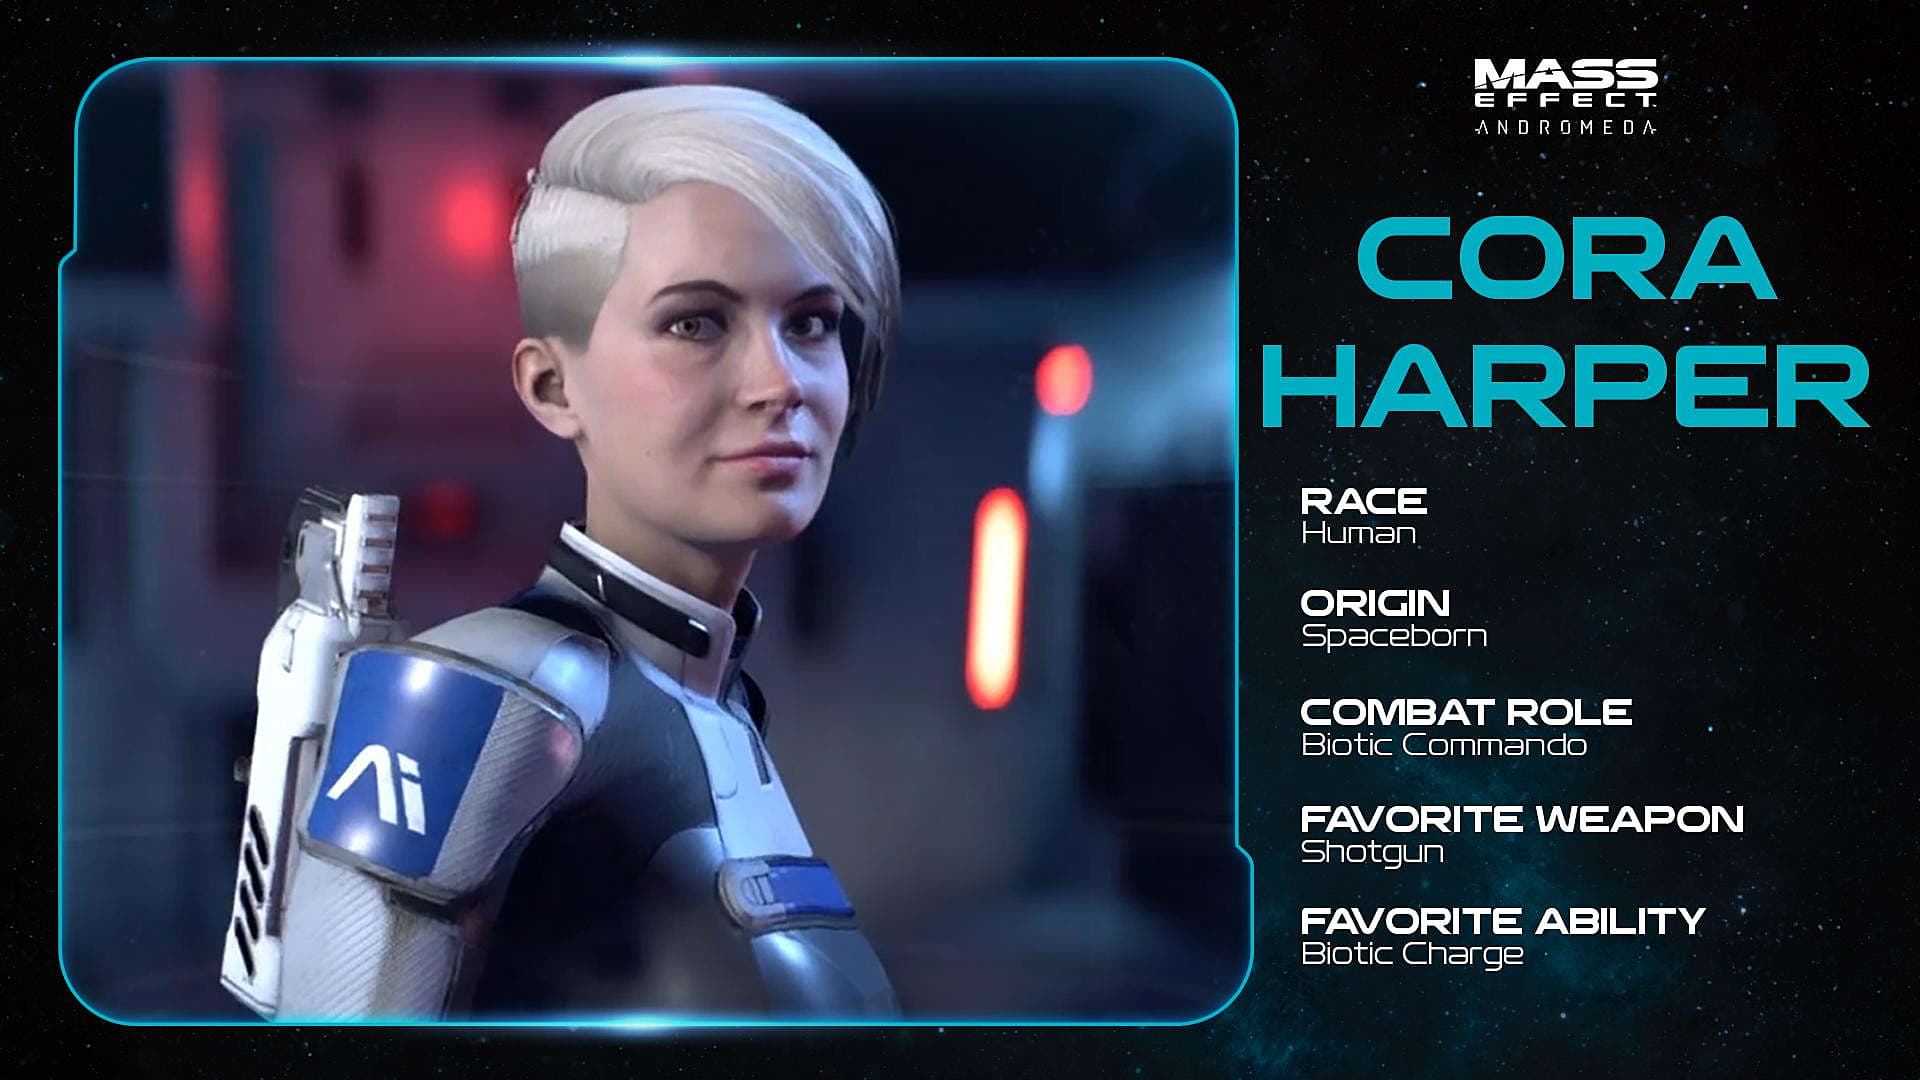 Meet Cora Harper Mass Effect Andromeda S First Revealed Companion